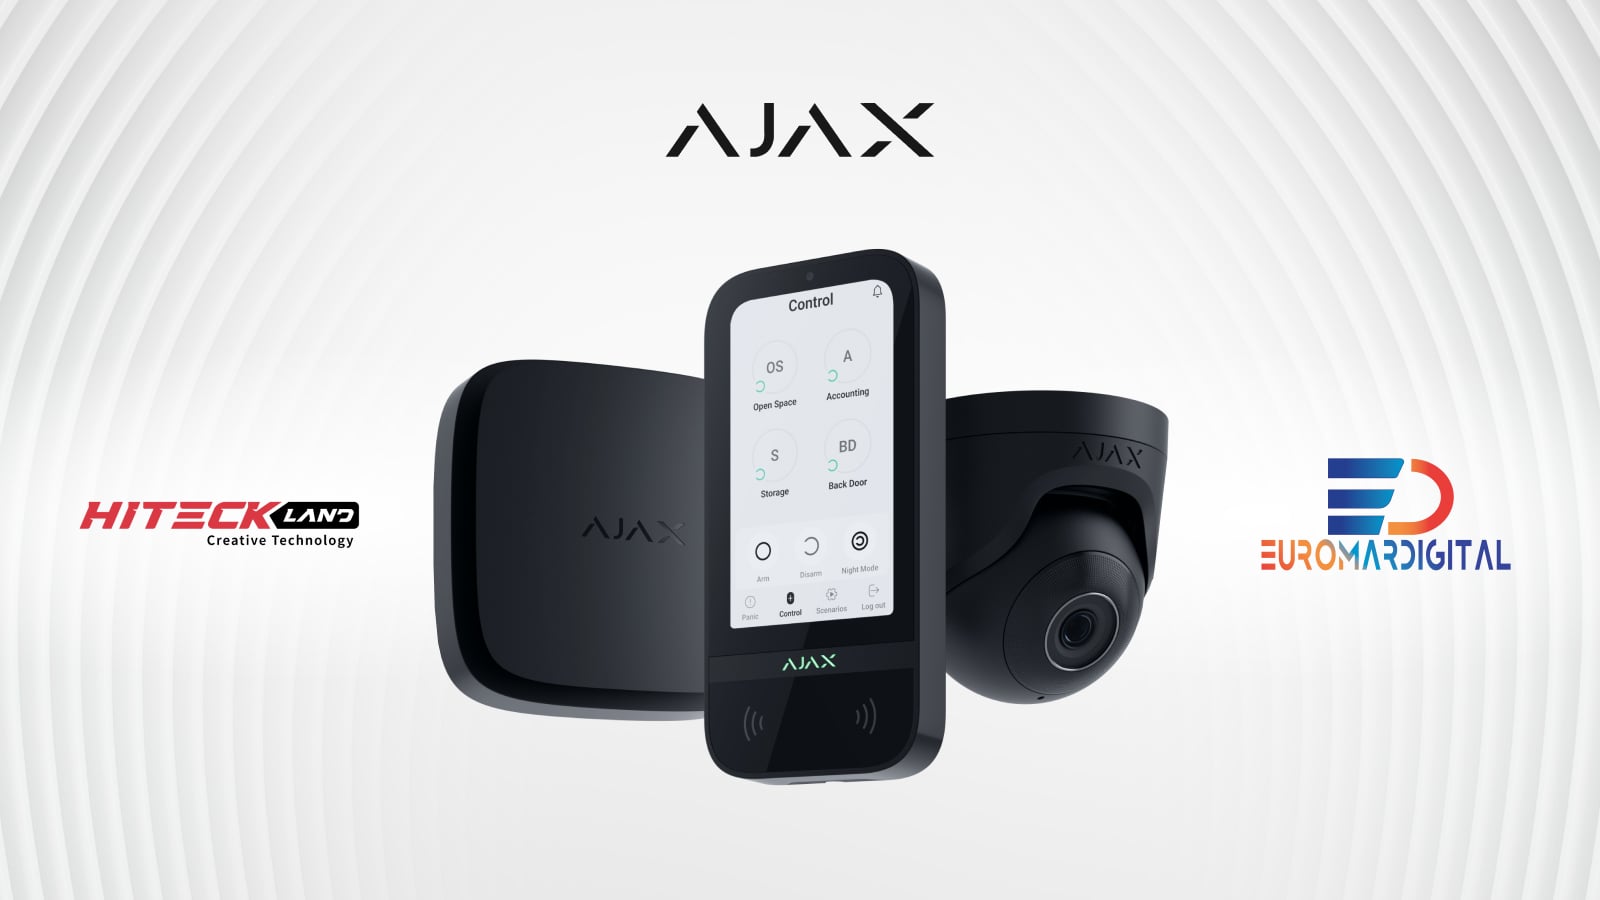 Ajax Systems enters the Morocco market through two new distribution partners